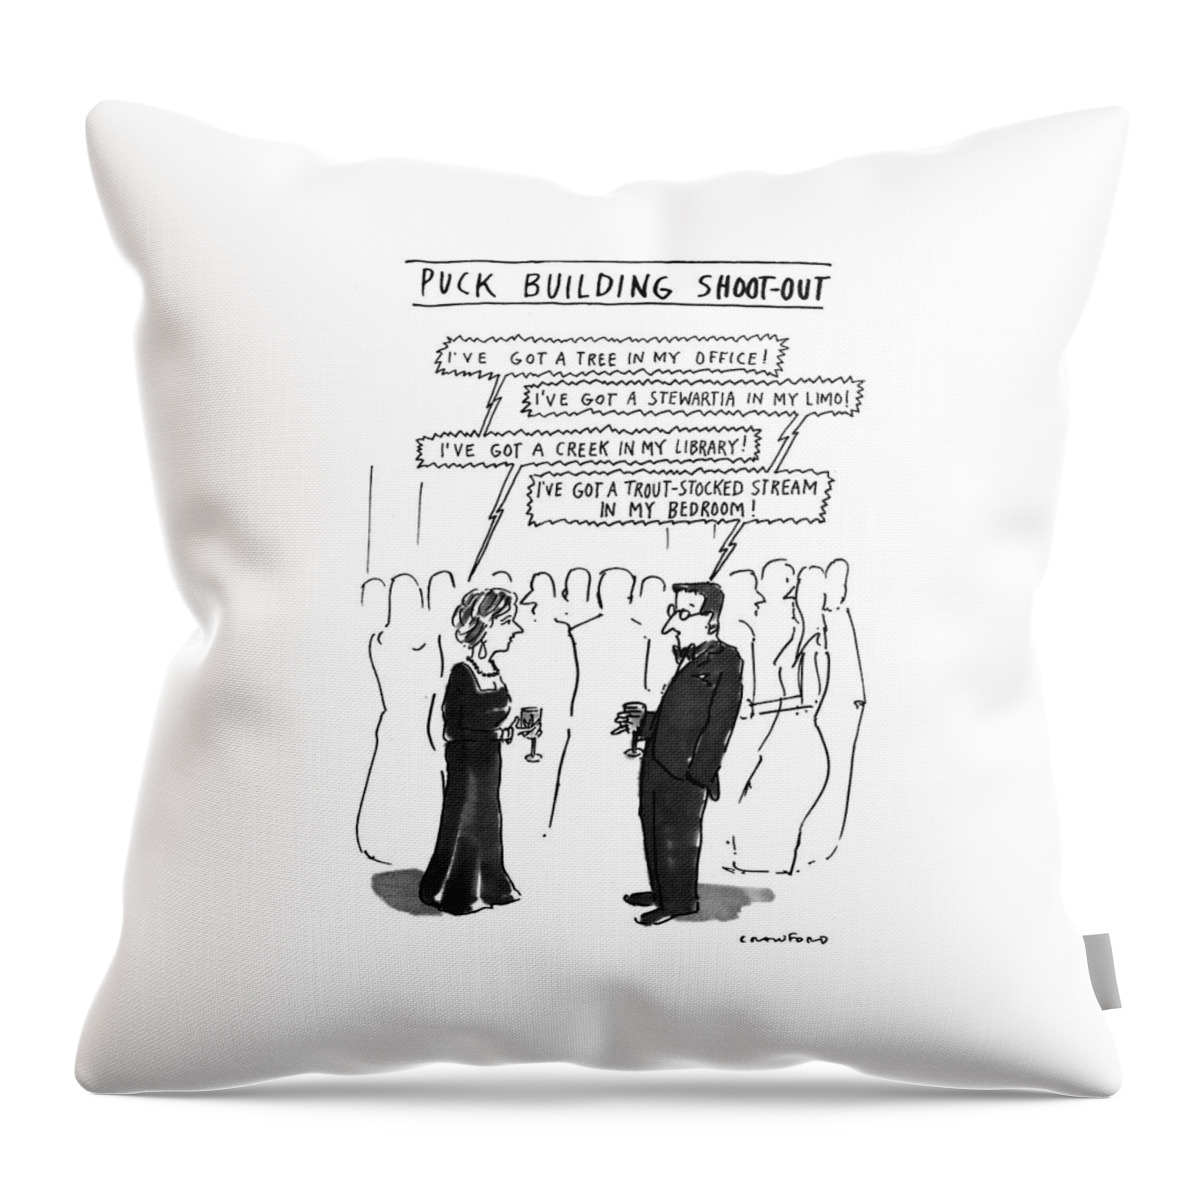 Puck Building Shoot-out Throw Pillow